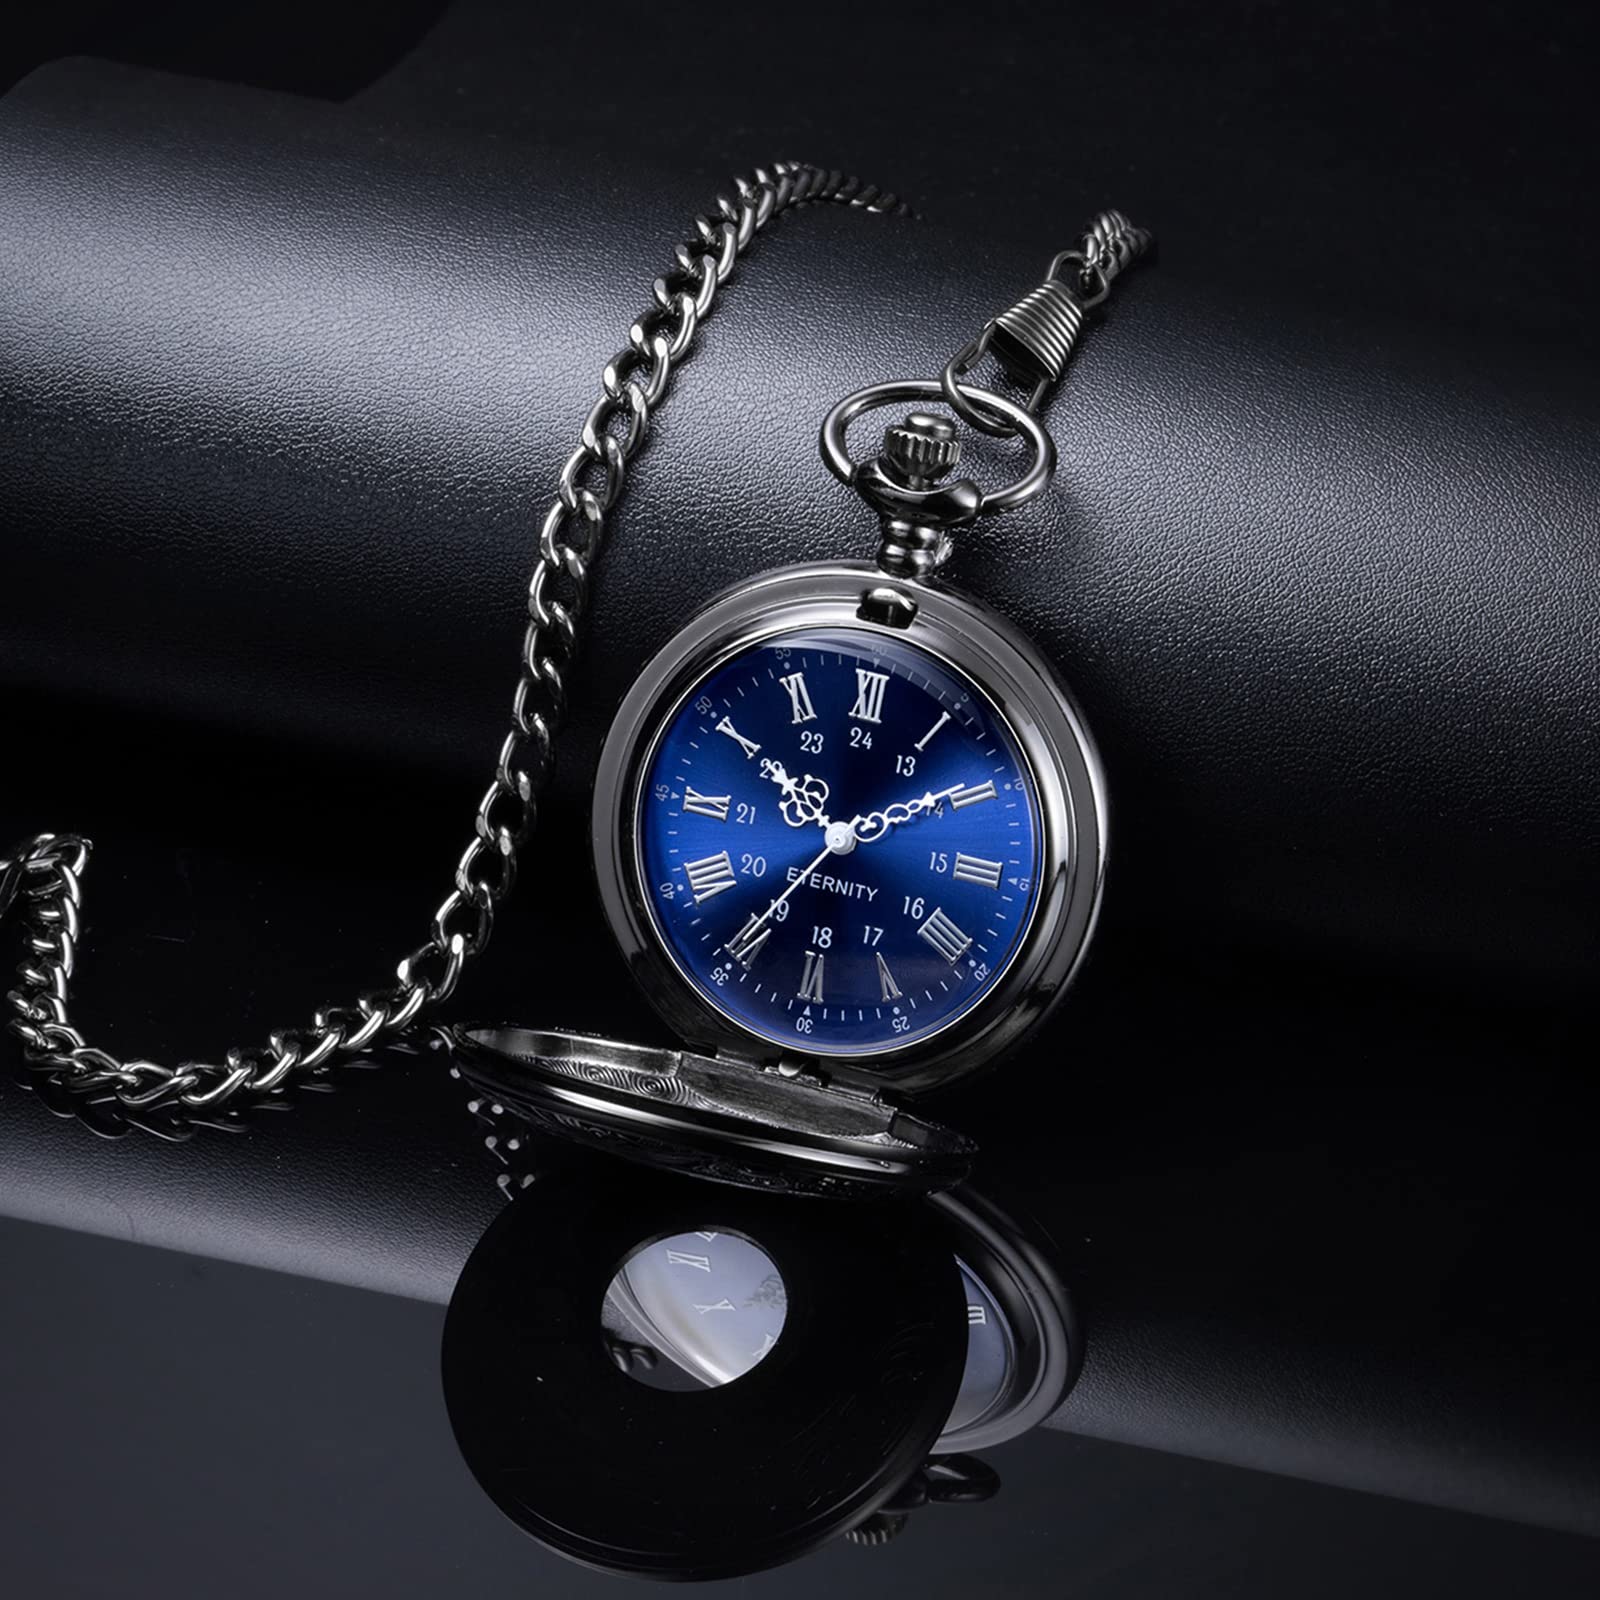 BOSHIYA Vintage Pocket Watch with Chain, Mens Quartz Bronze Pocket Watch with Roman Numerals Scale and Unique Blue Dial Apply to Christmas Graduation Birthday Gifts Fathers Day